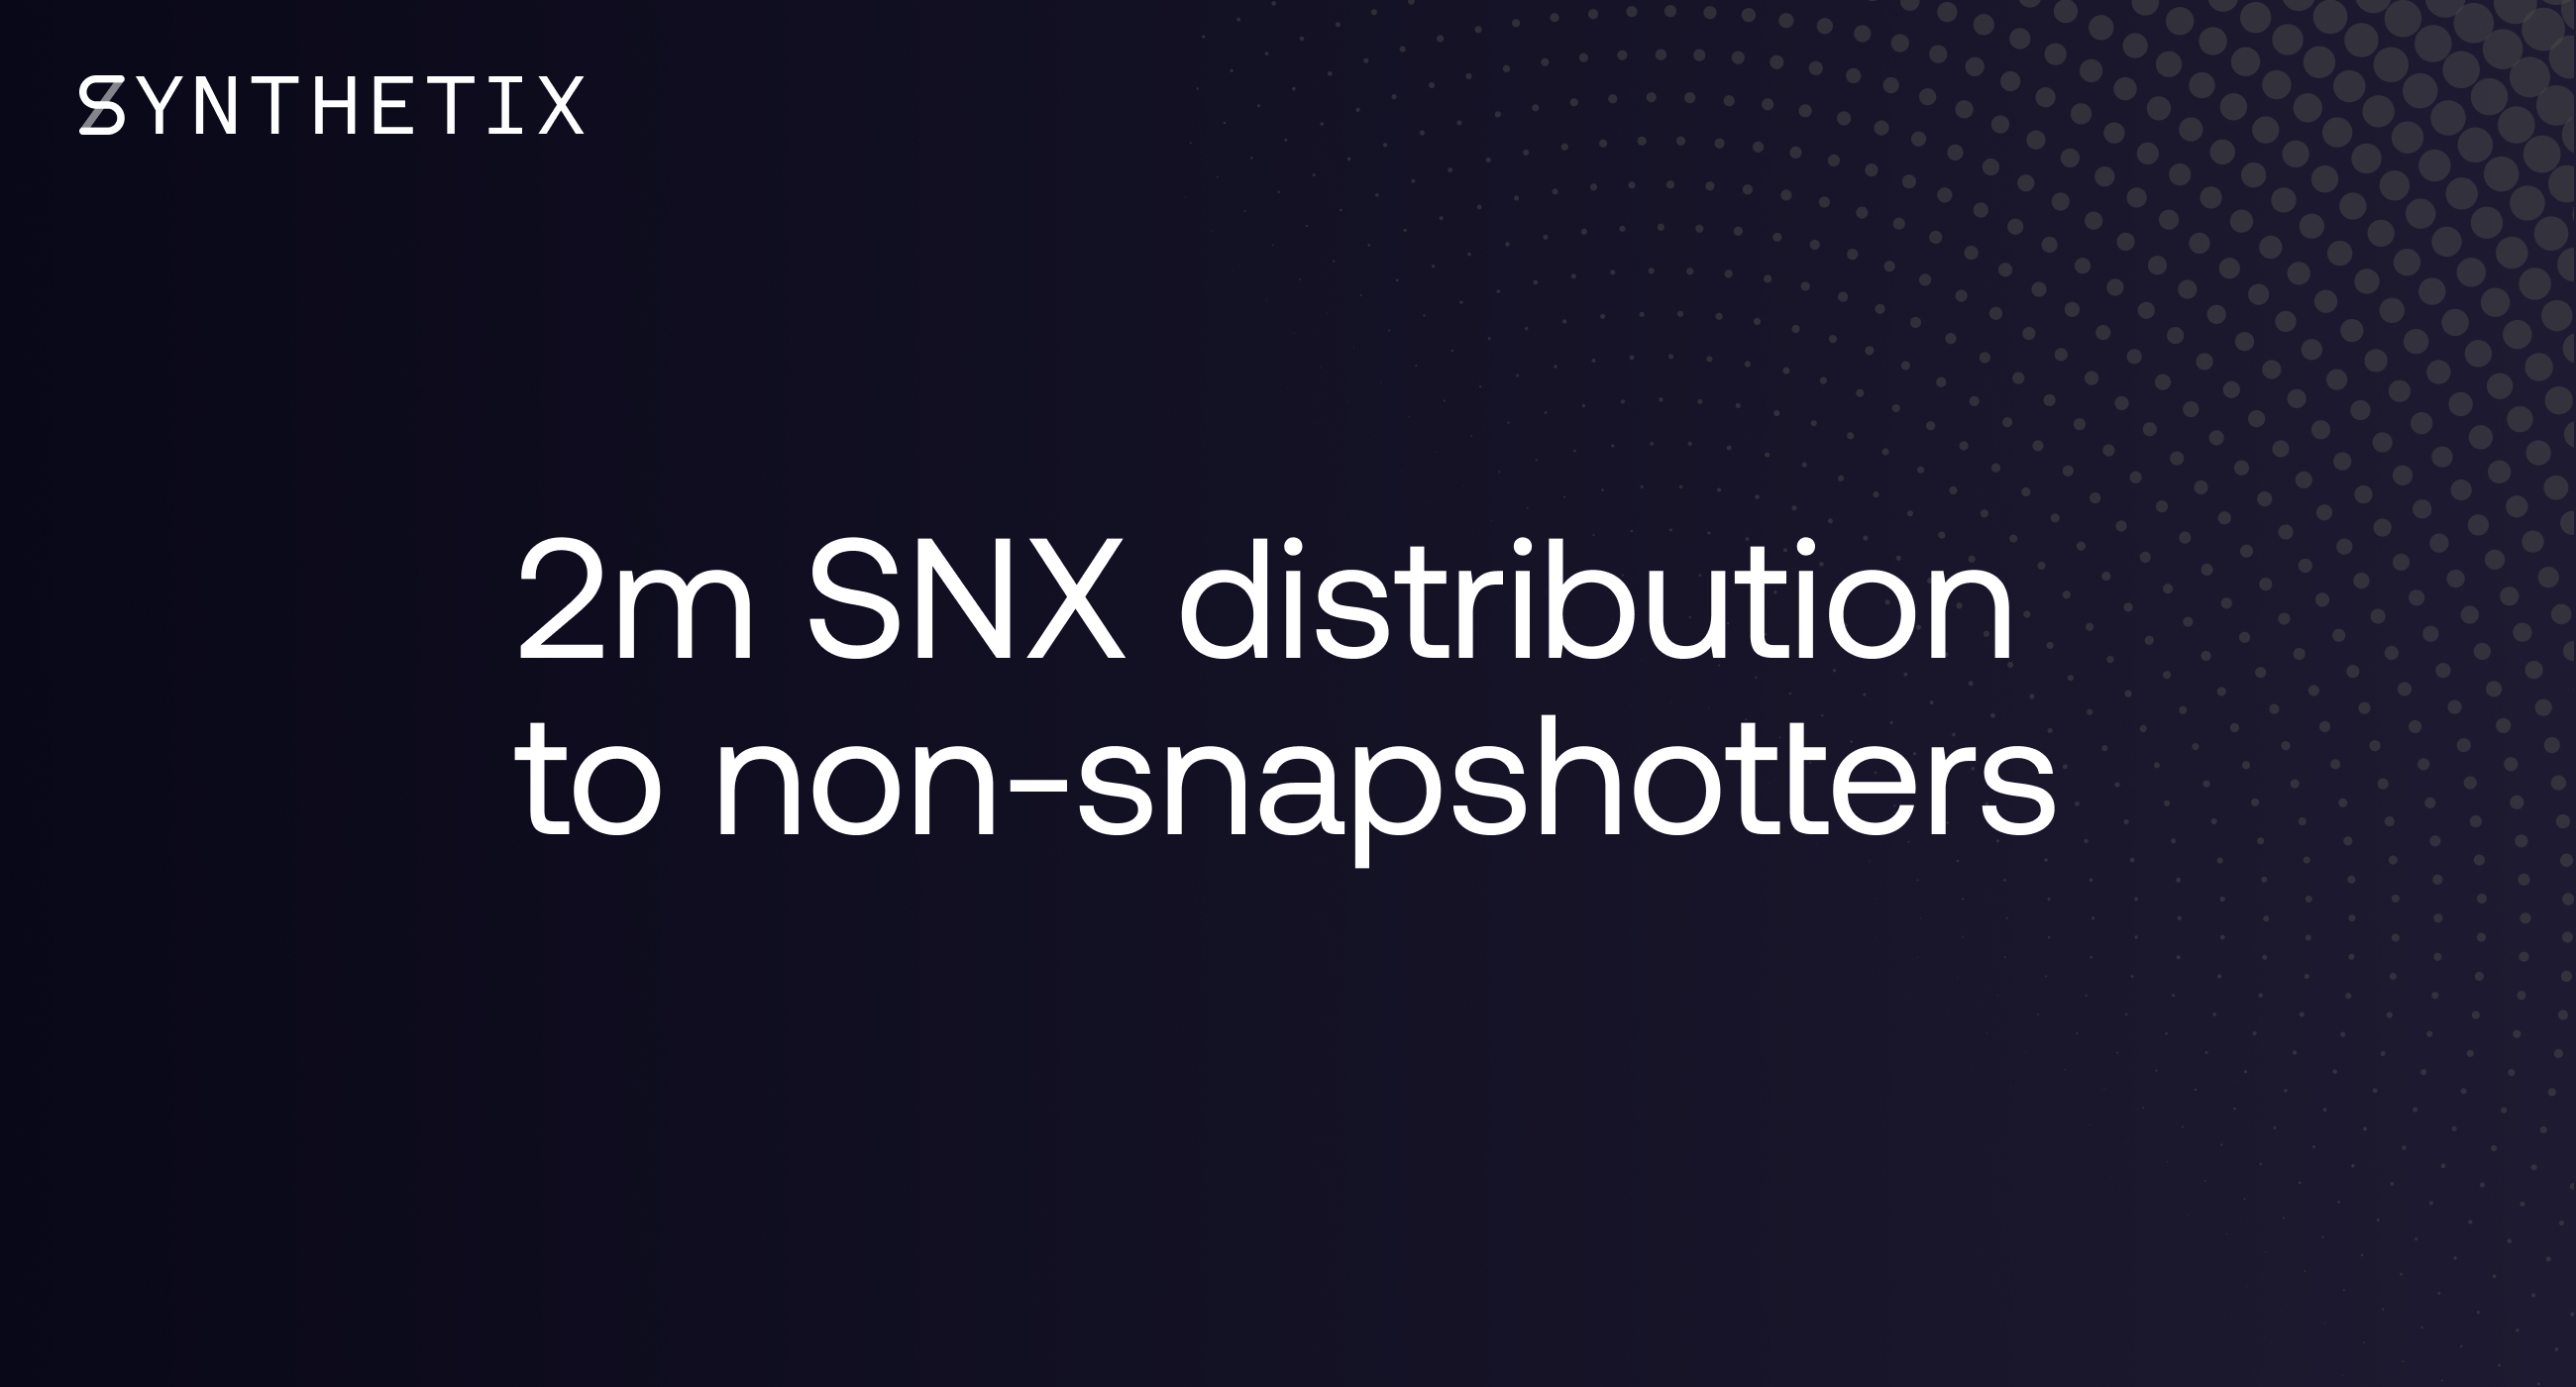 Details about the 2m SNX distribution